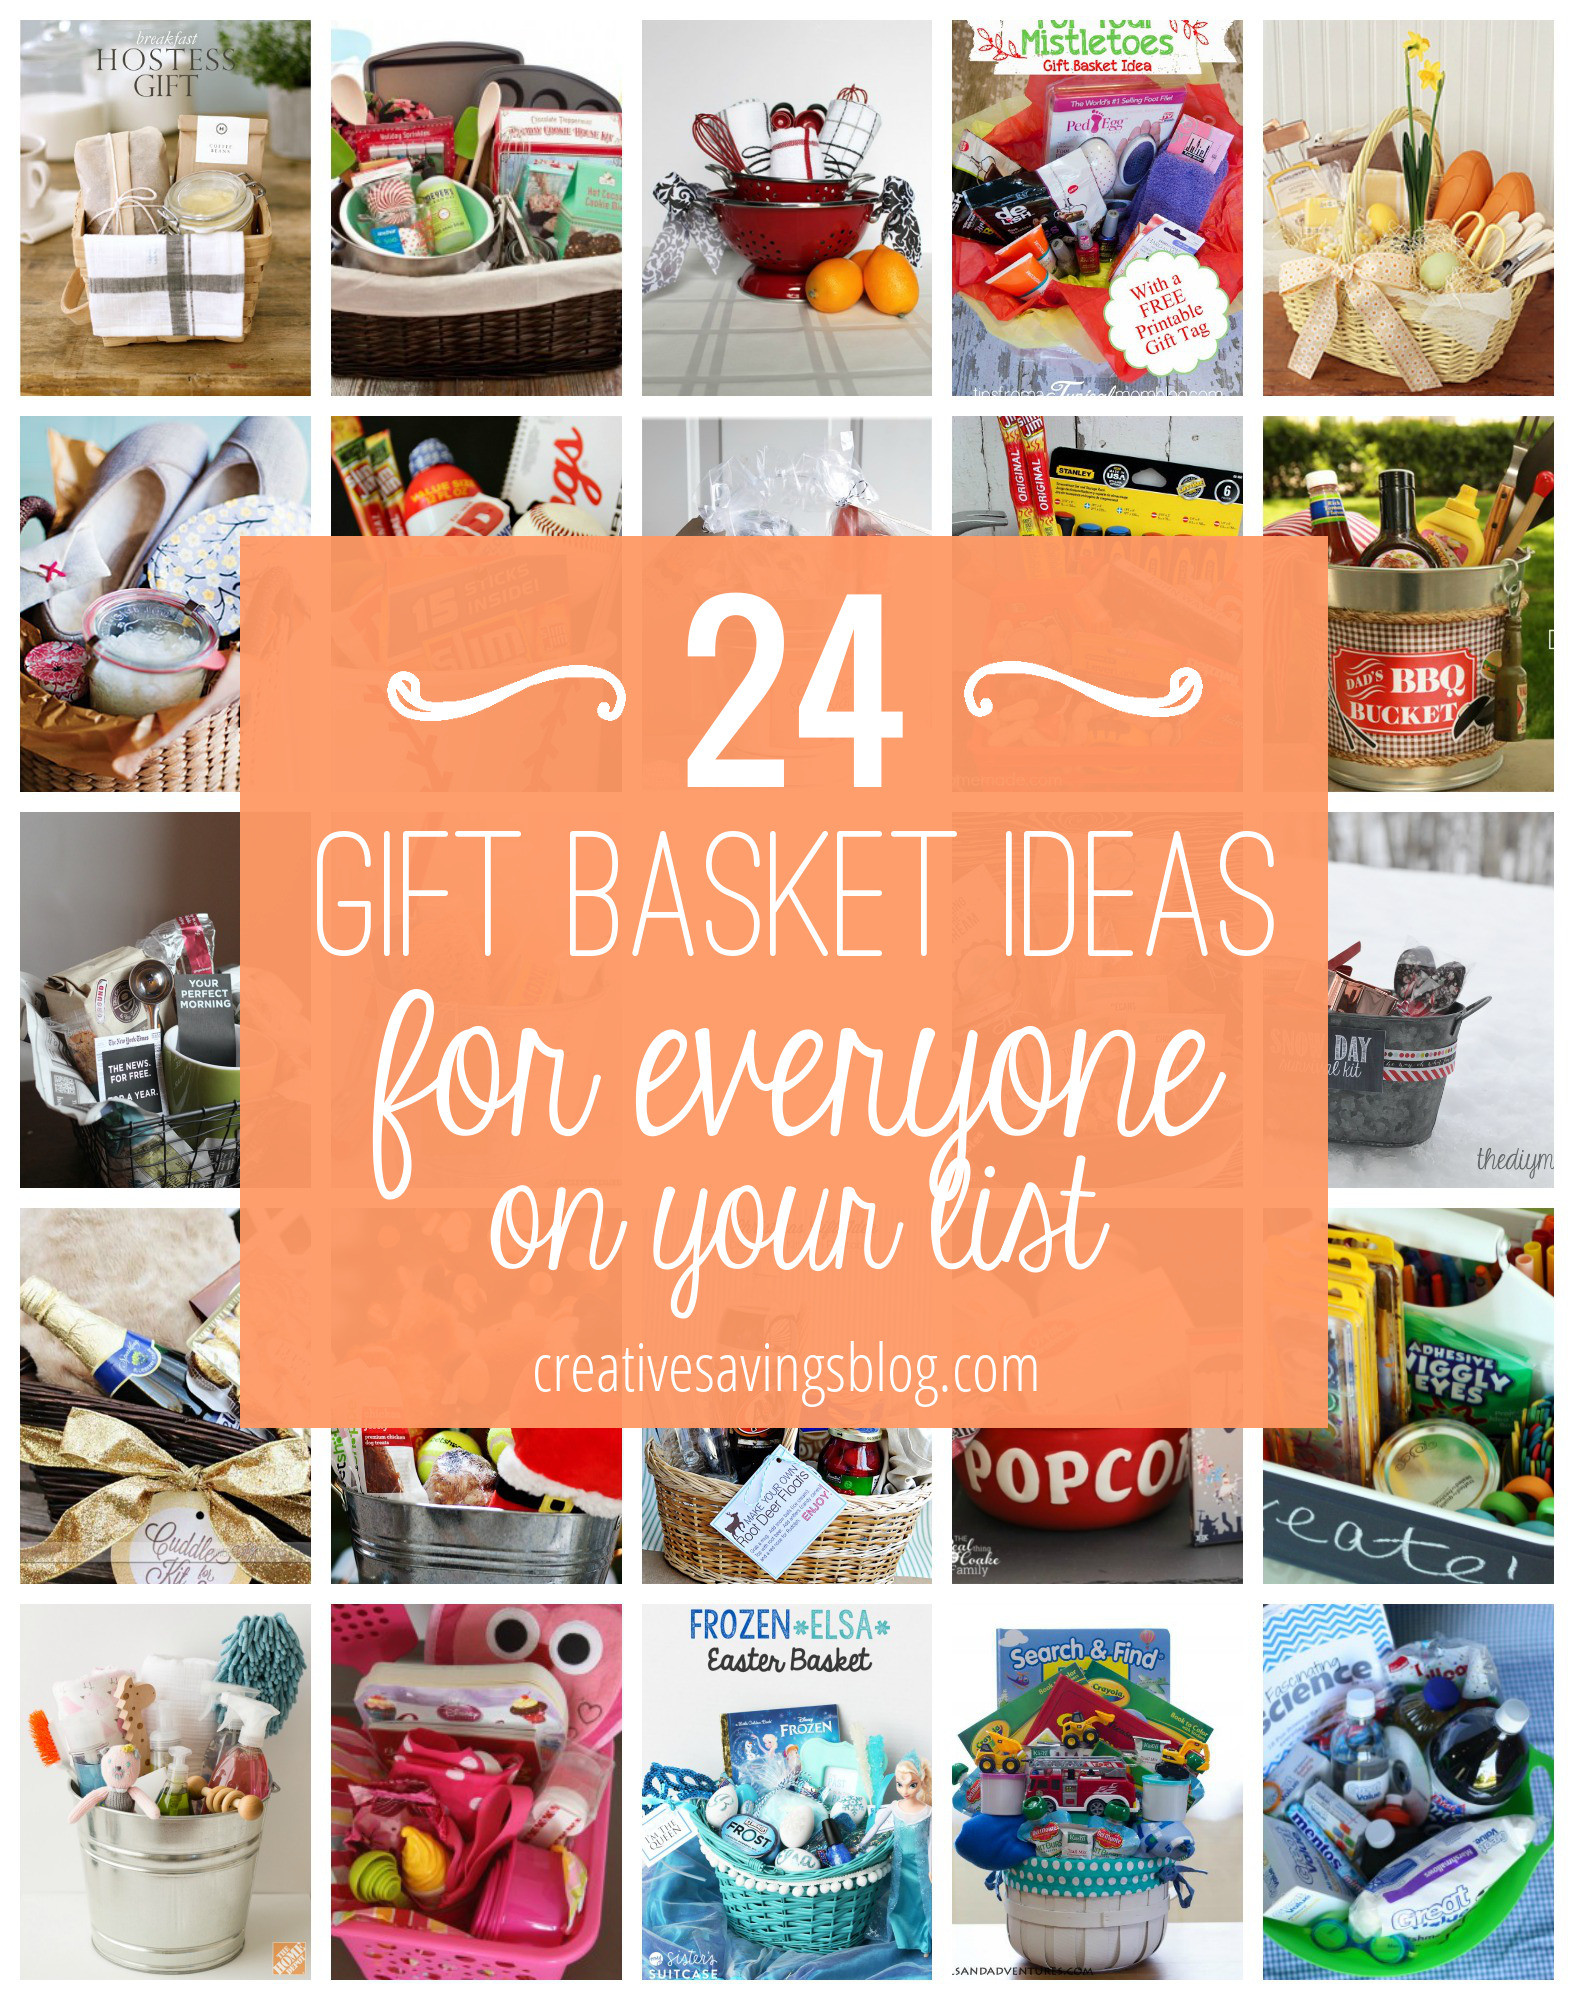 Clever Gift Basket Theme Ideas
 DIY Gift Basket Ideas for Everyone on Your List